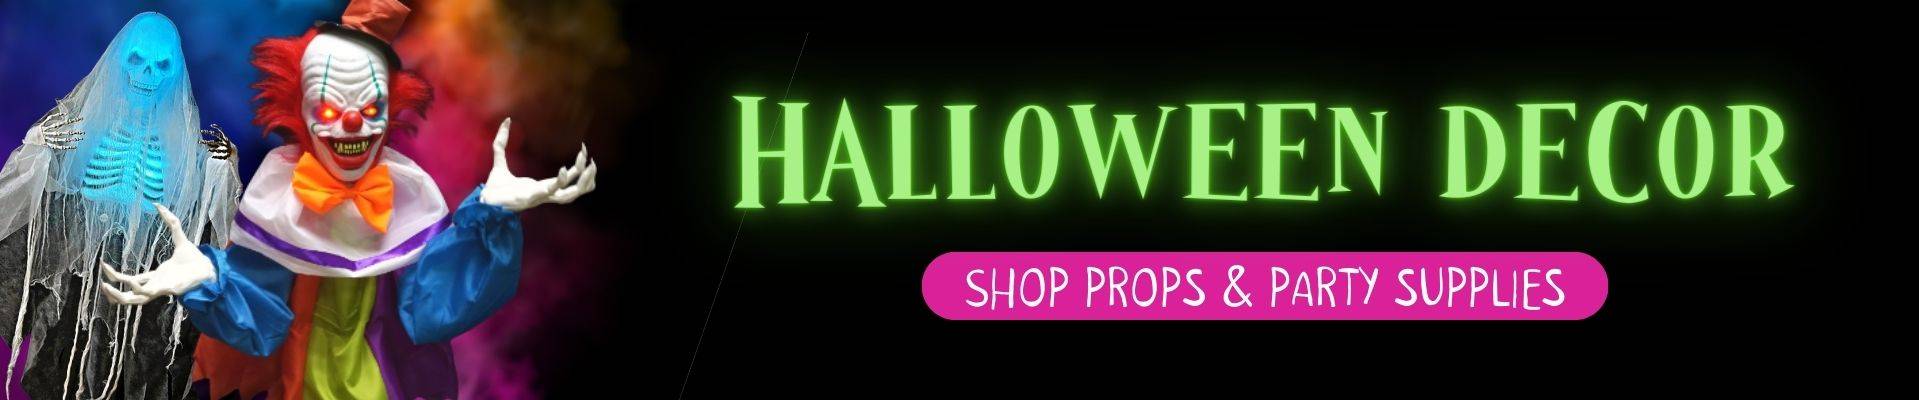 Skeleton ghost and scary clown props. Halloween Decor. Shop props and party supplies.